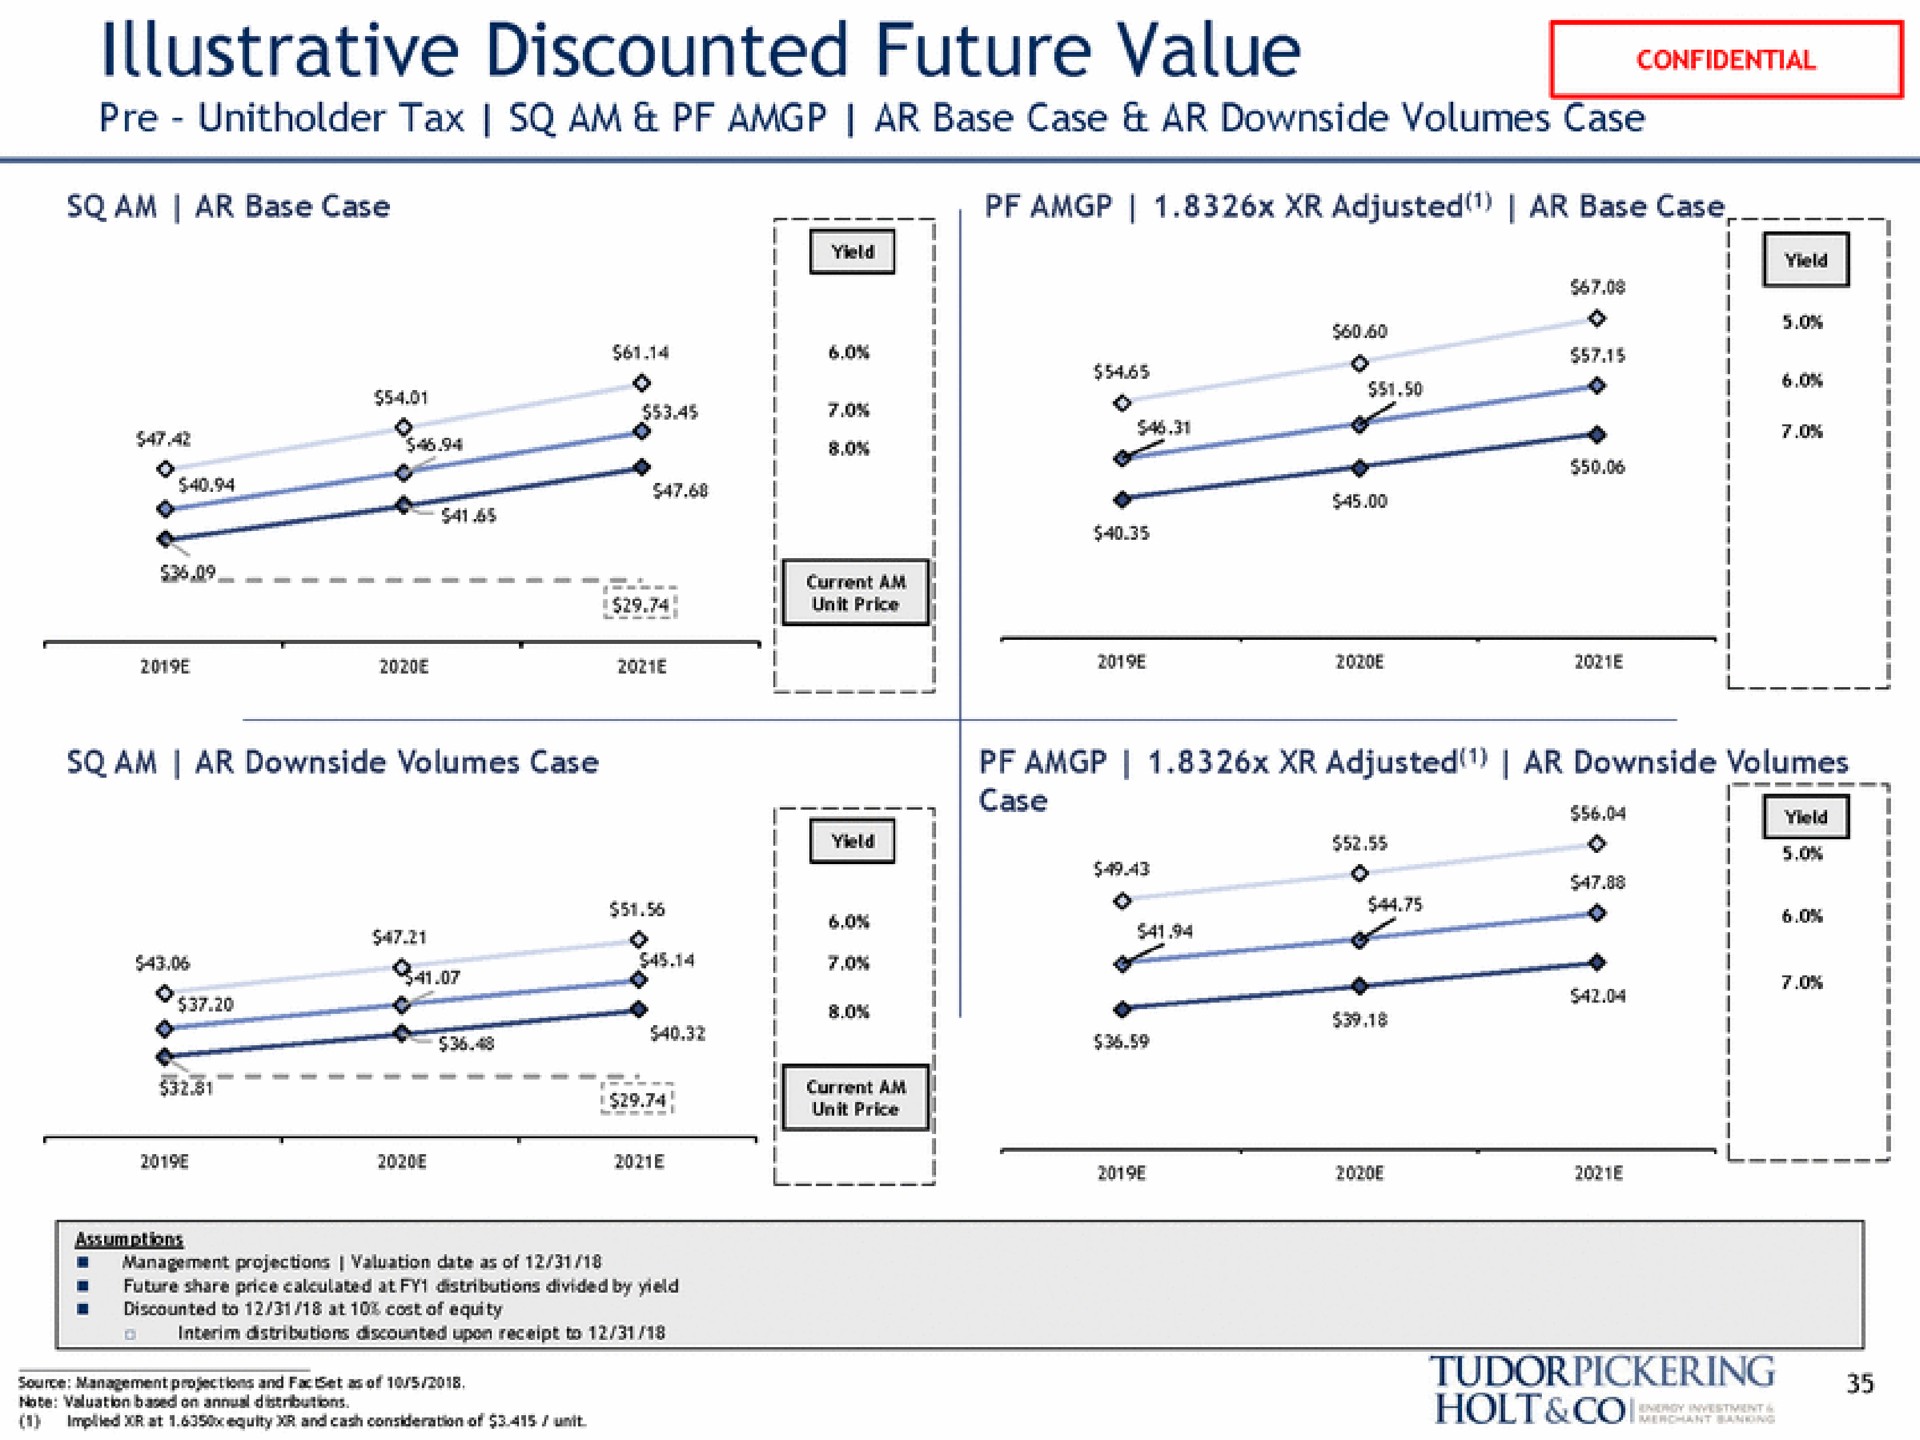 illustrative discounted future value source management projections and of | Tudor, Pickering, Holt & Co